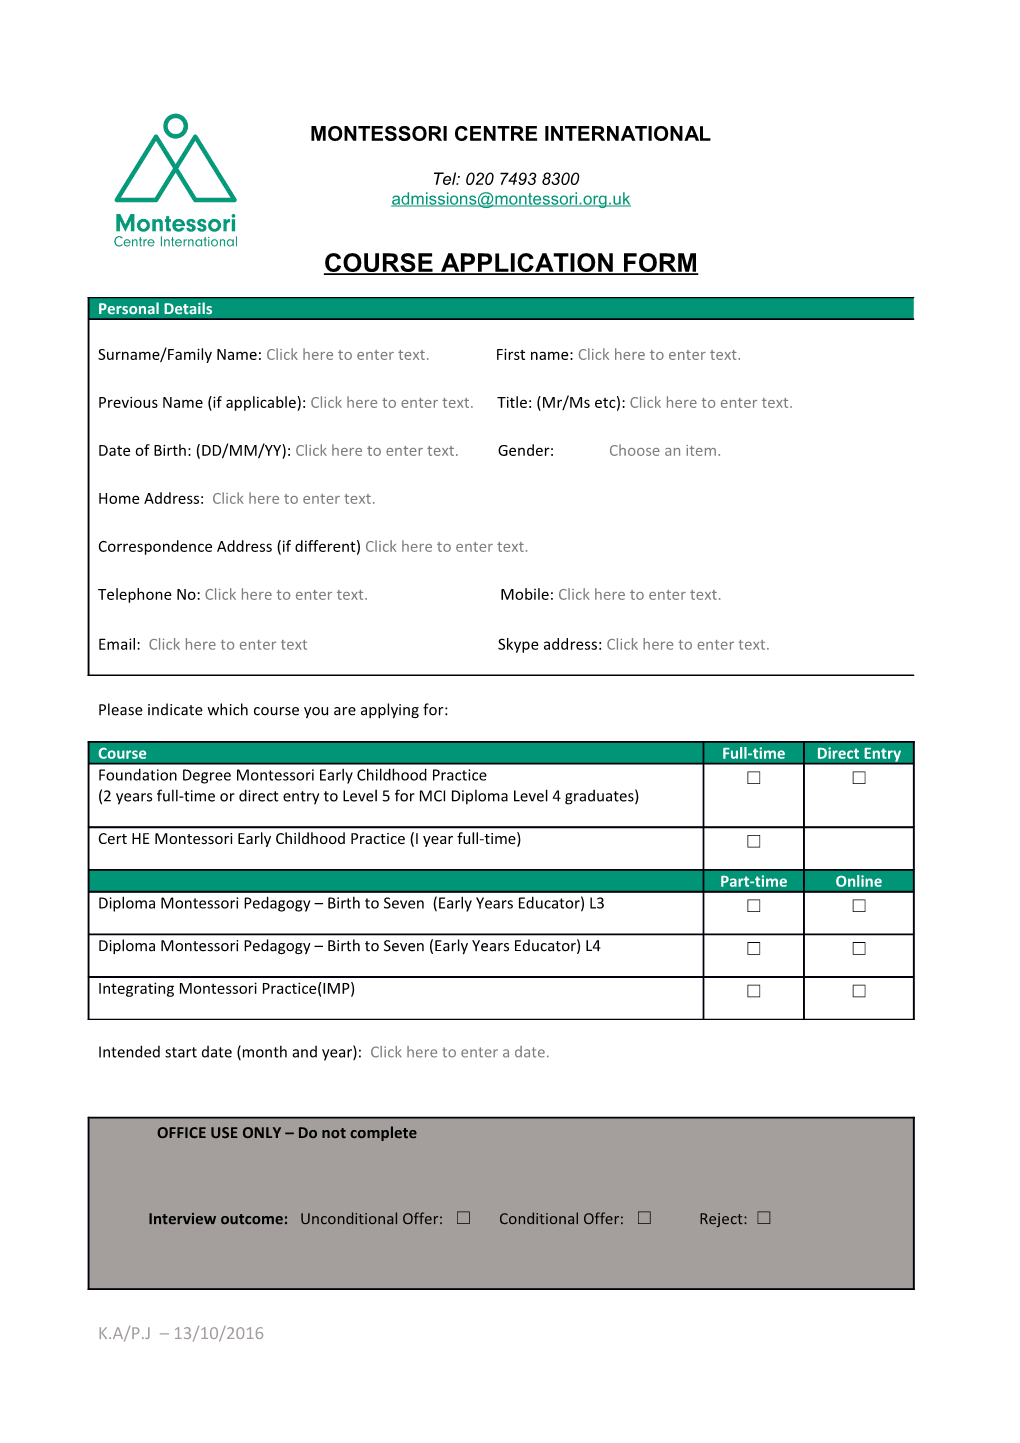 Please Indicate Which Course You Are Applying For s1